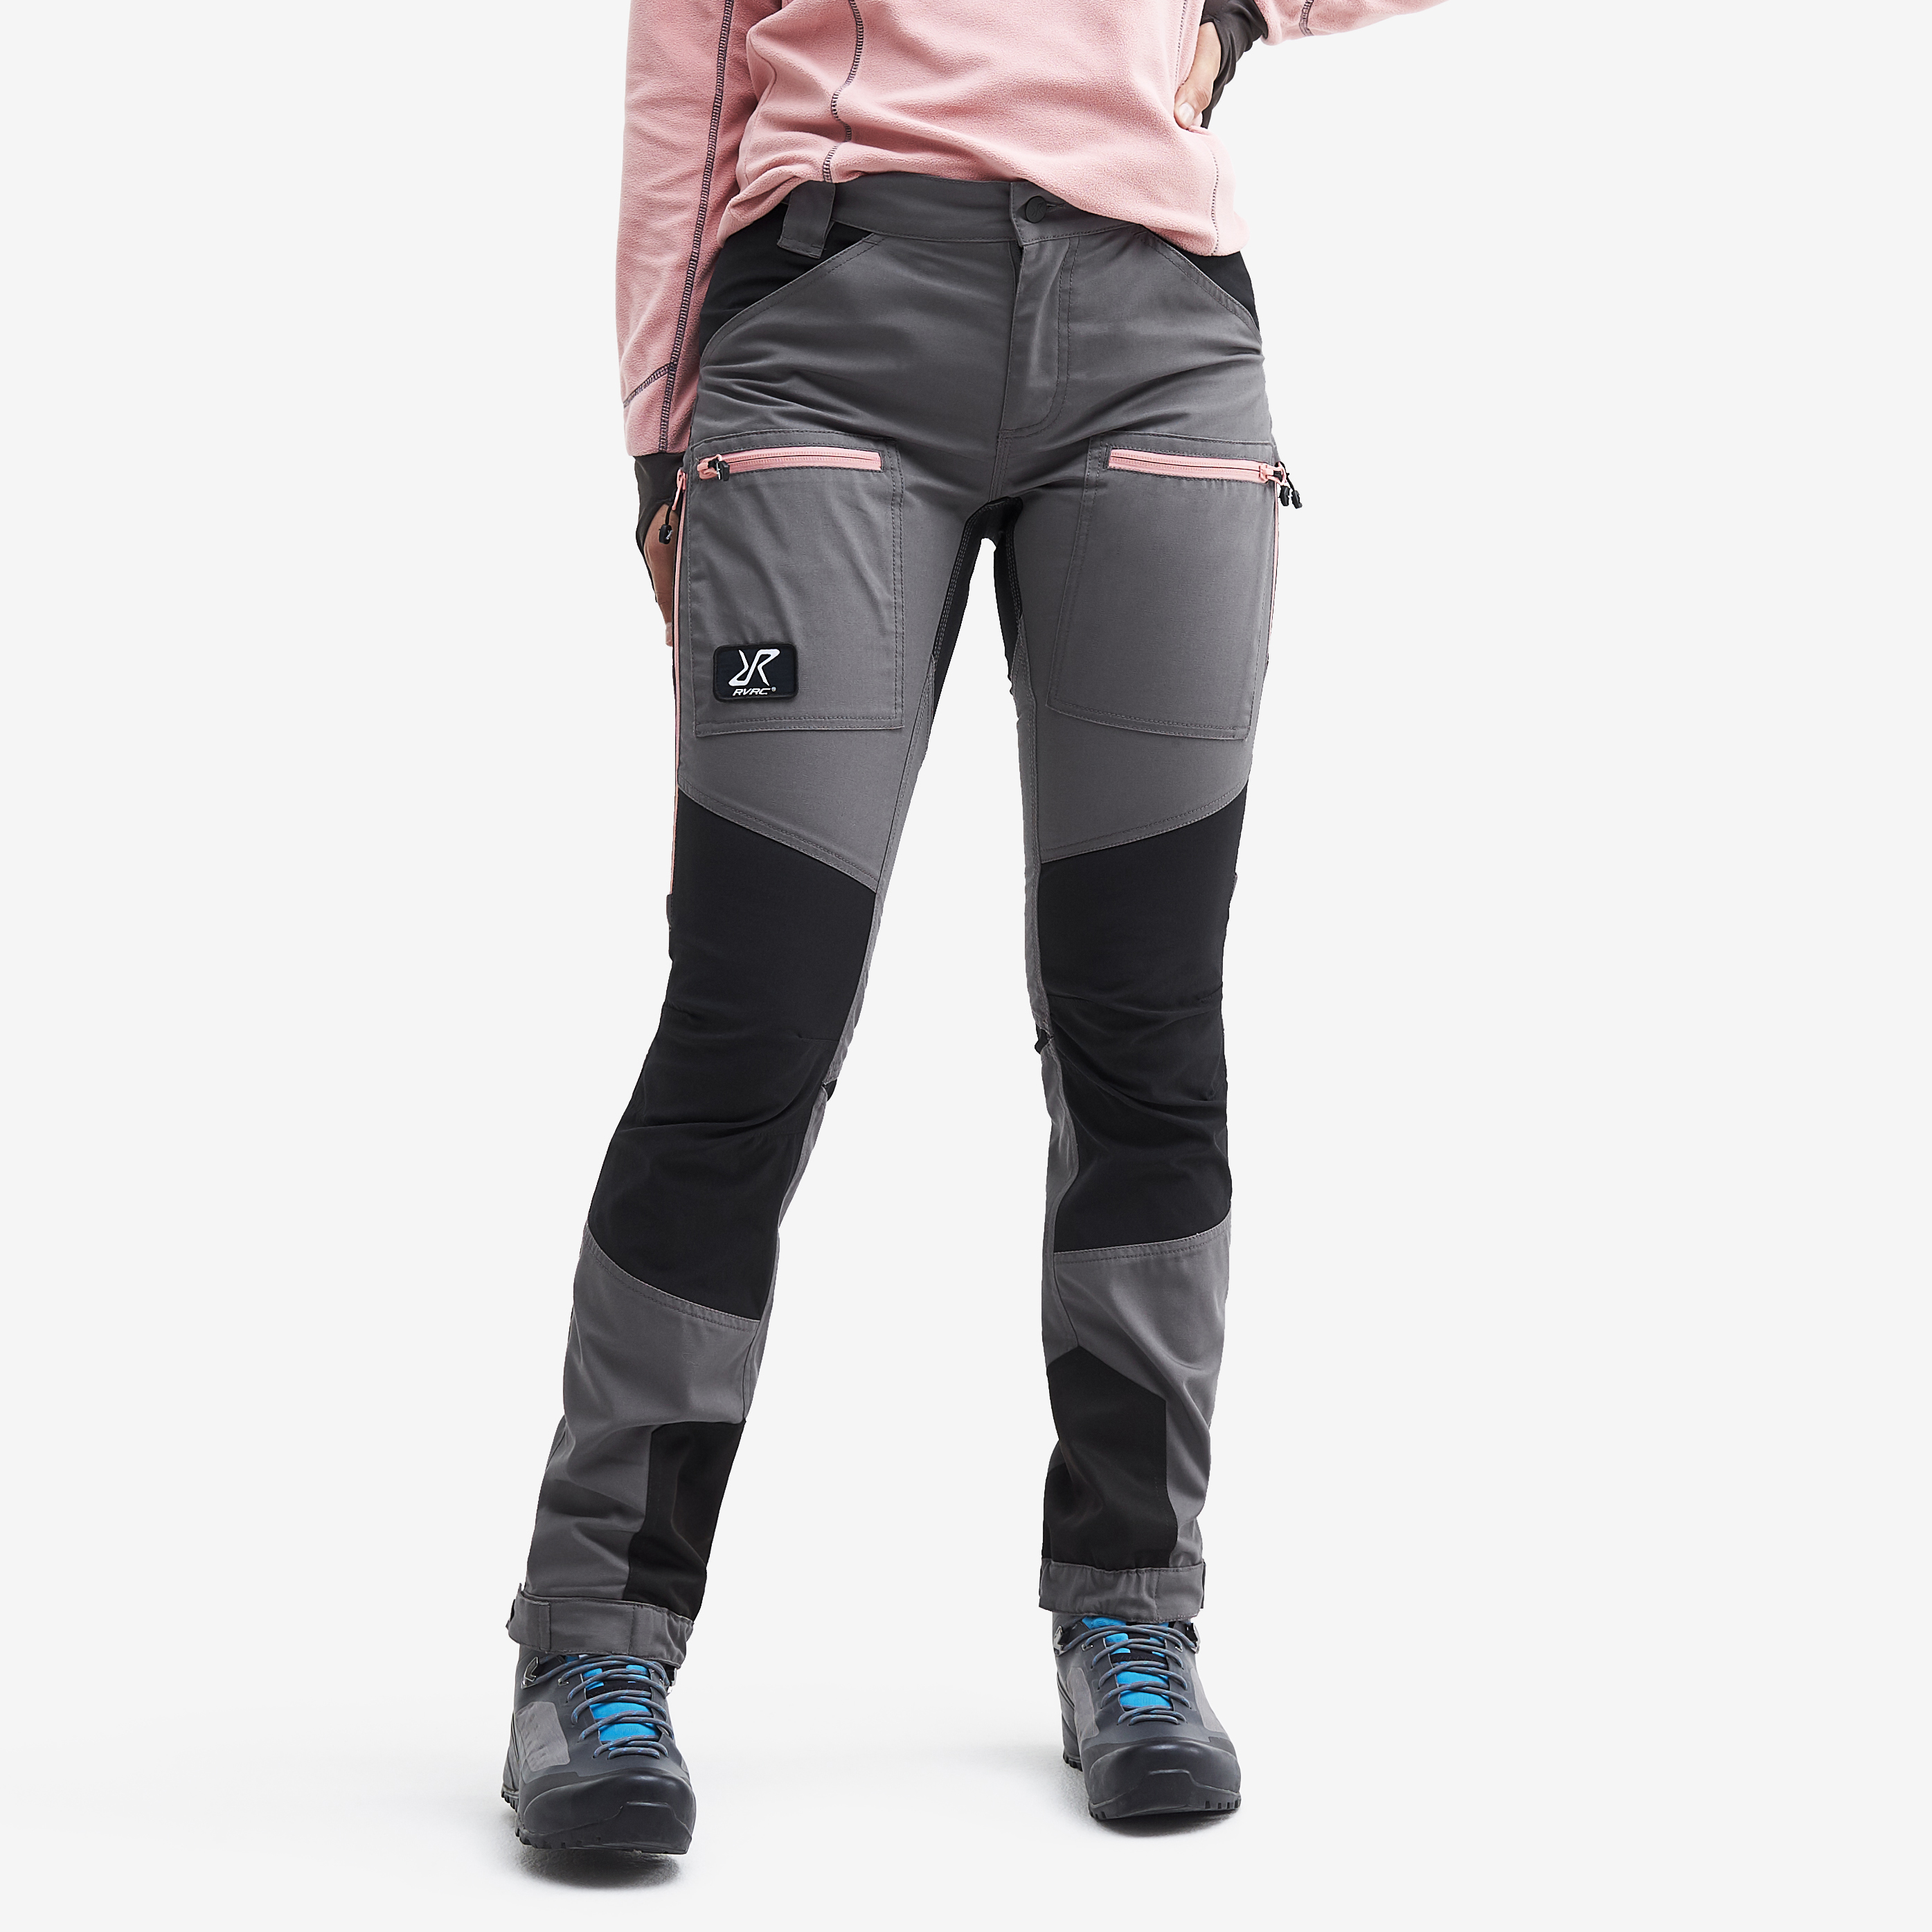 Nordwand Pro Pants Grey/Dusty Pink Femme